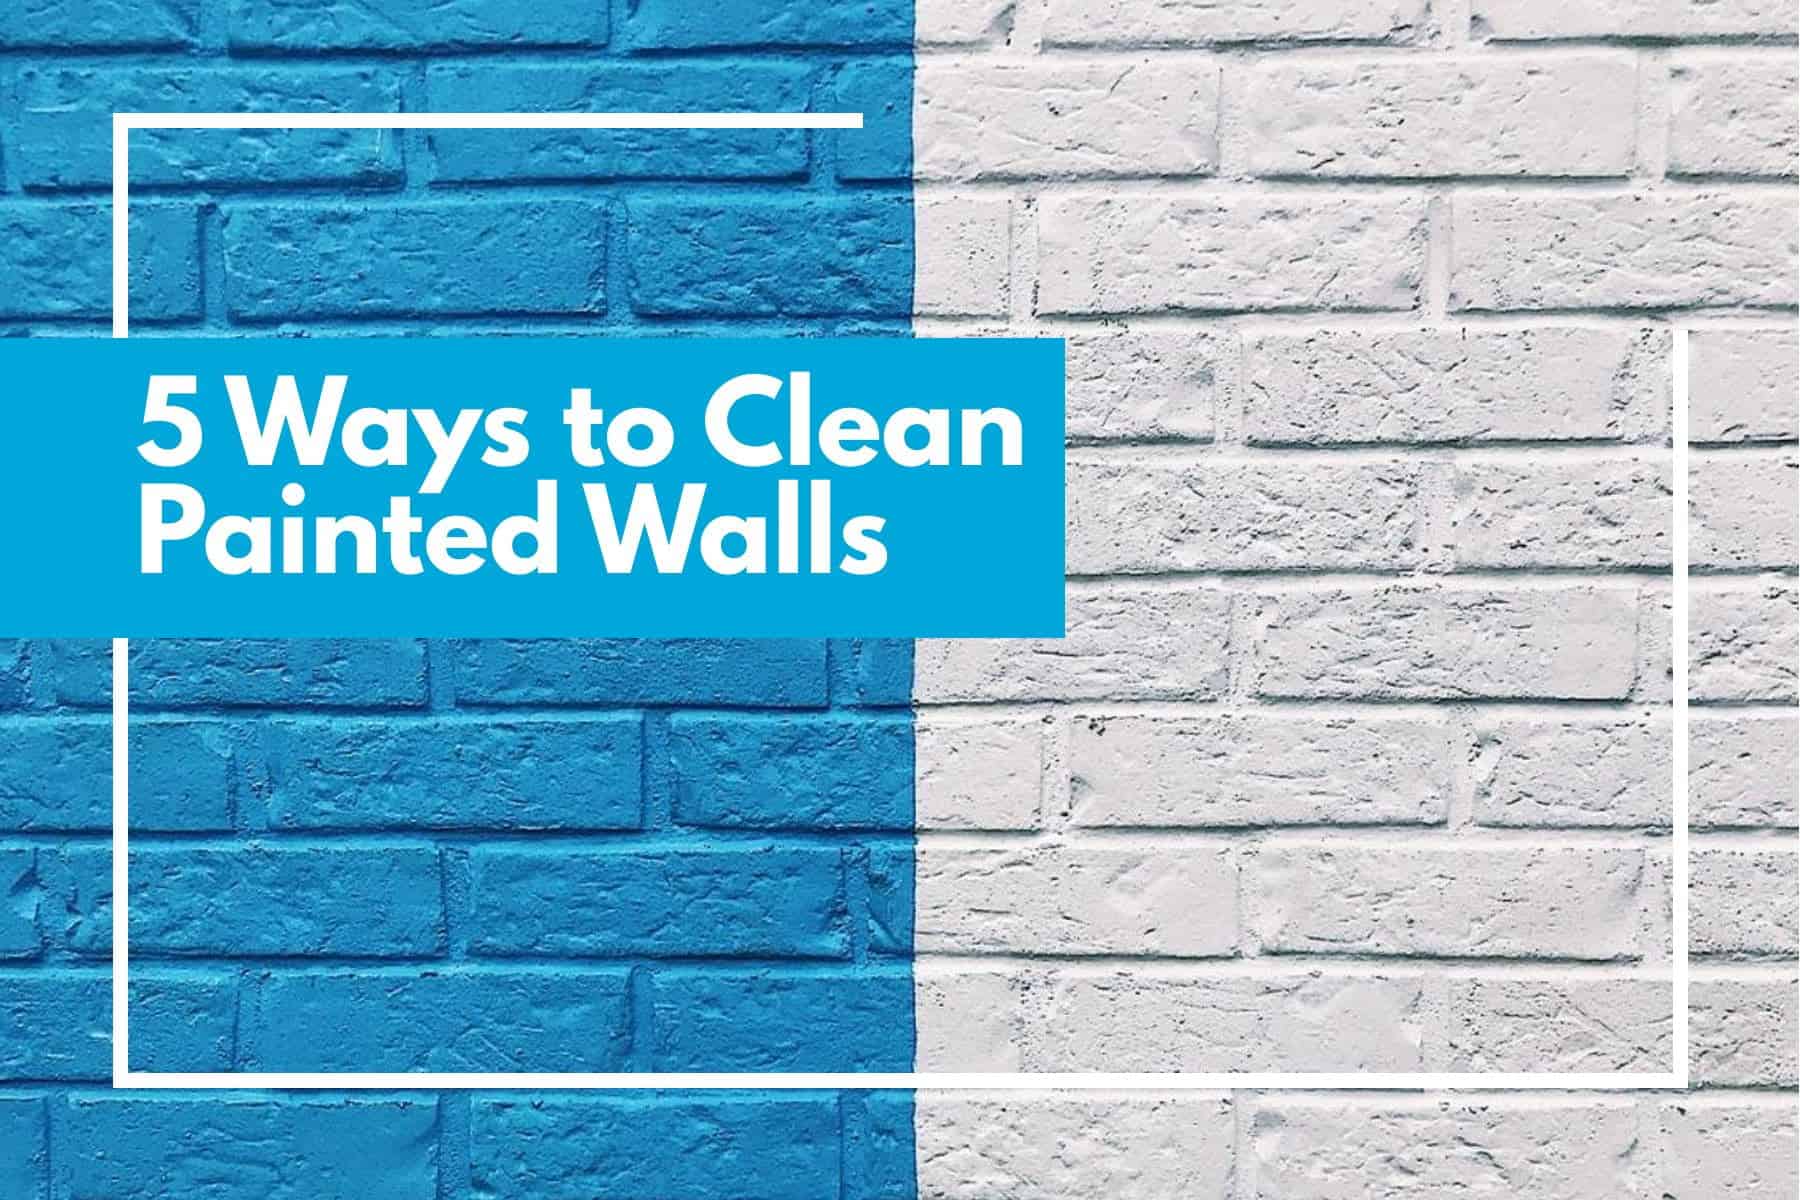 5 Ways To Clean Painted Walls